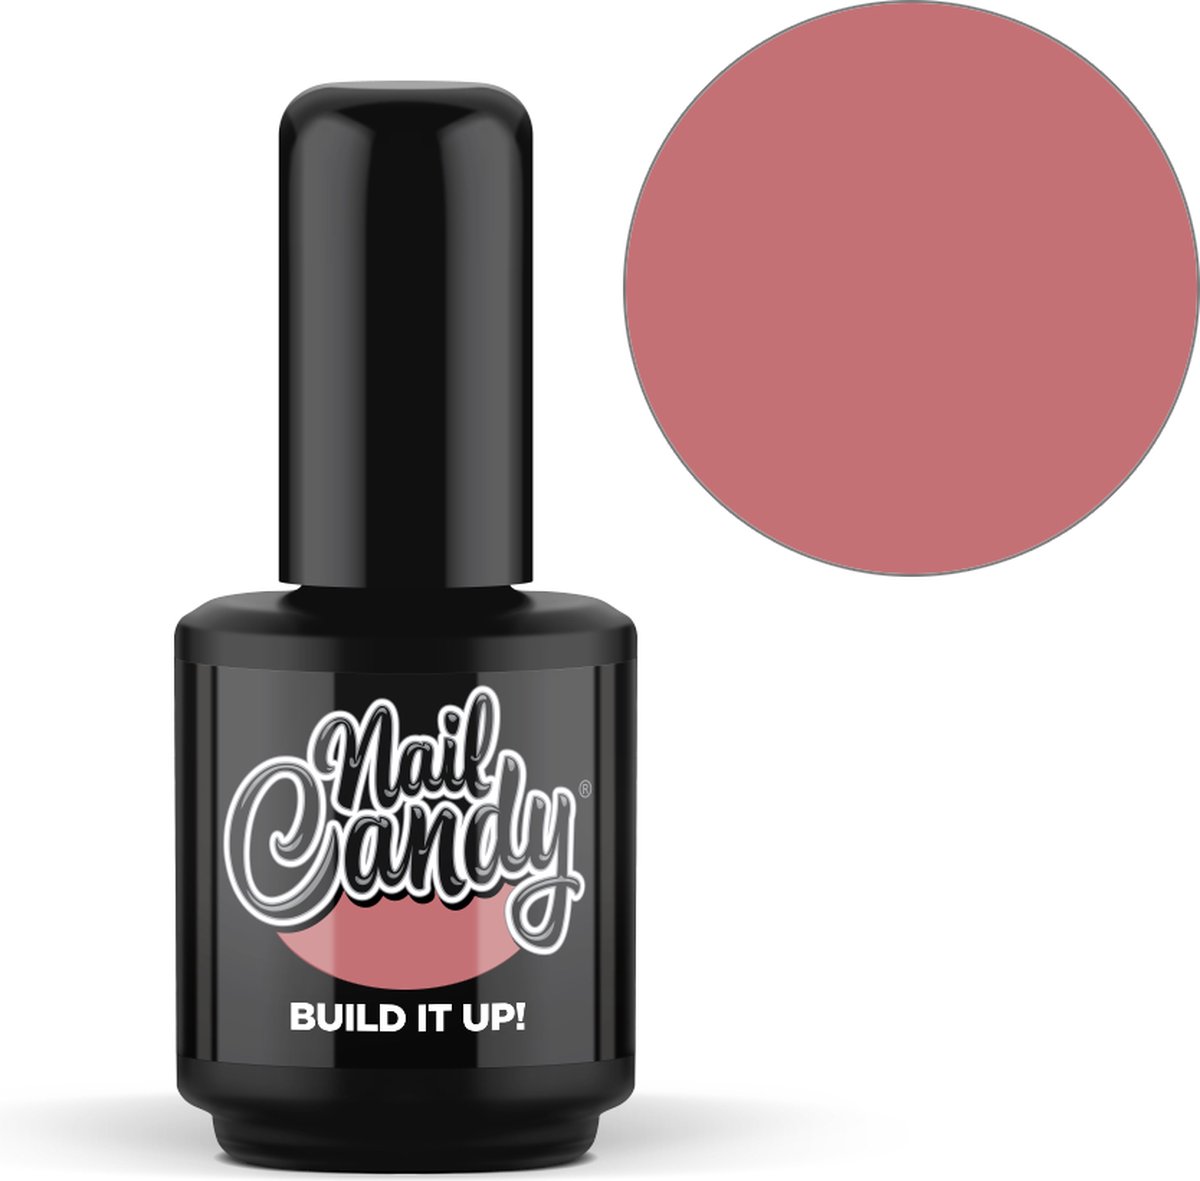 Nail Candy Build It Up Peachy Nude 15 ml